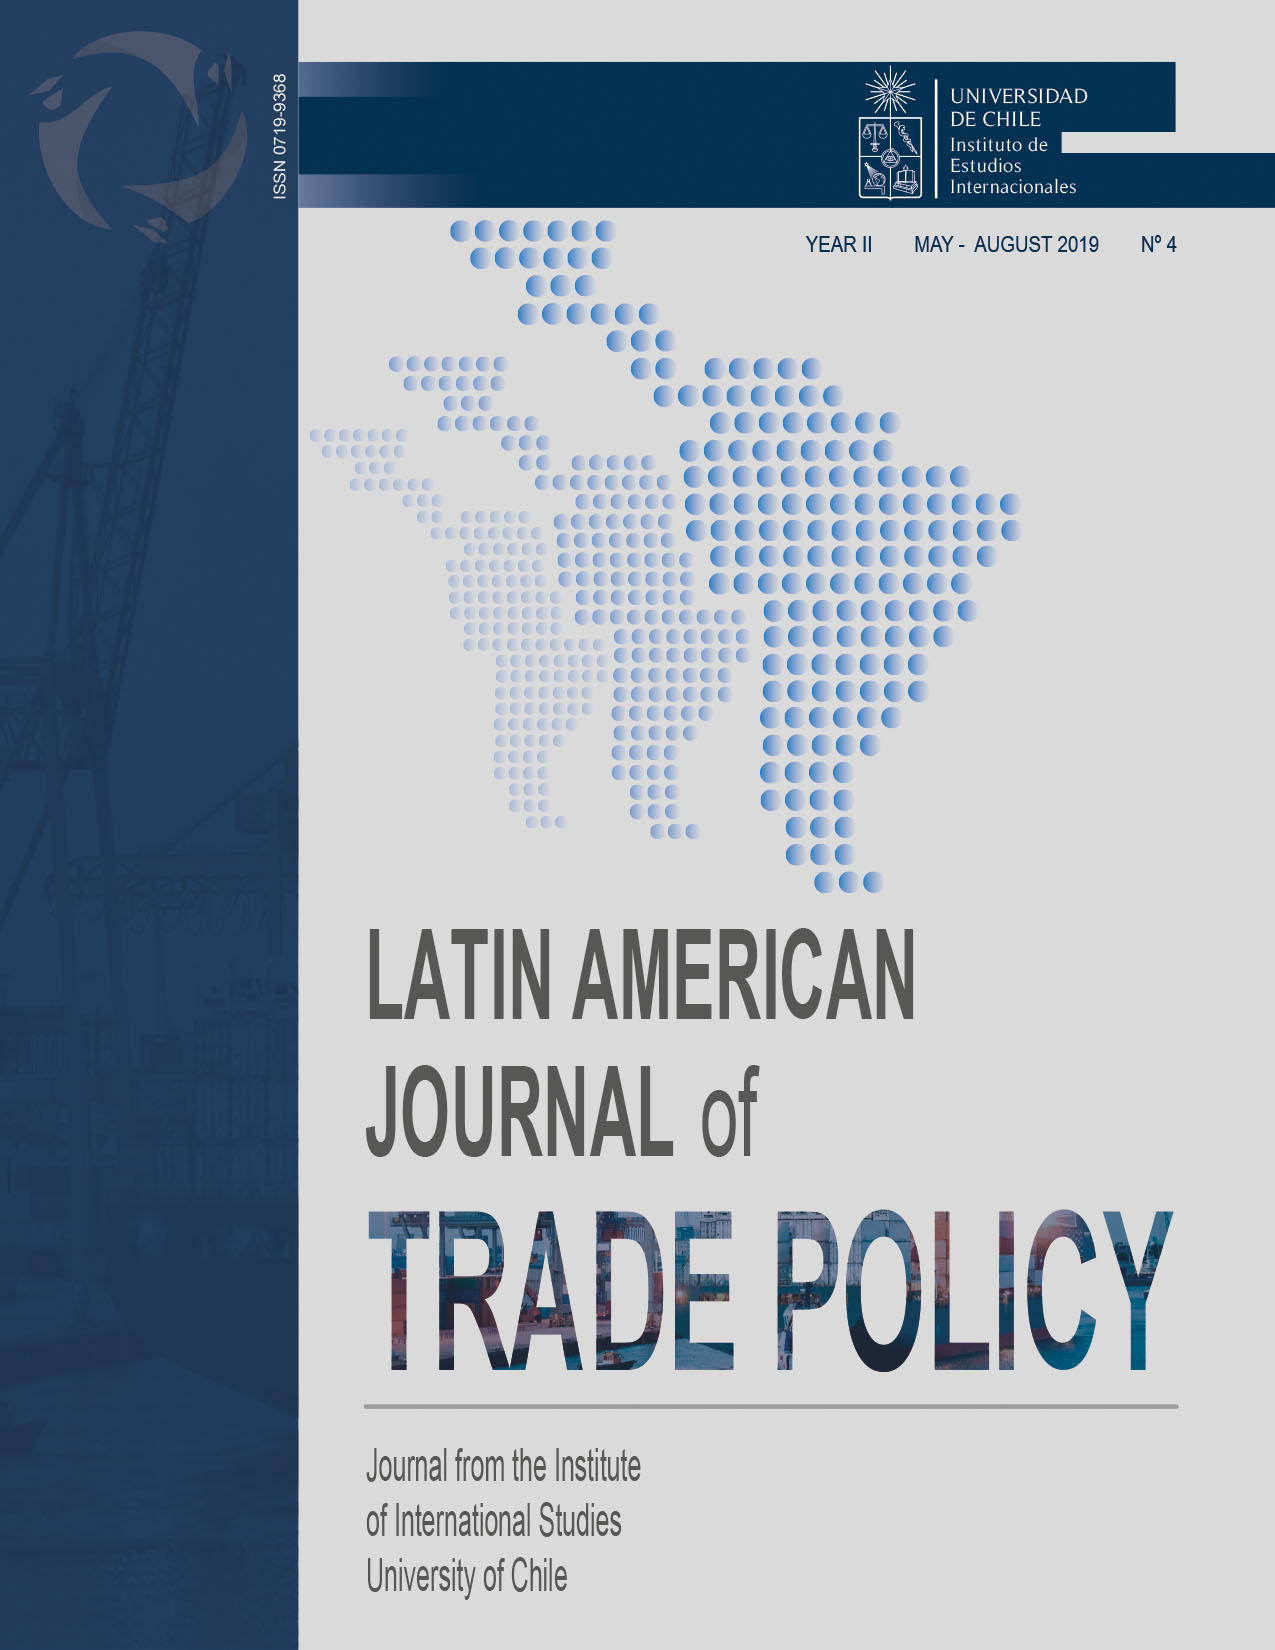 											Ver Vol. 2 Núm. 4 (2019): Latin American Journal of Trade Policy
										